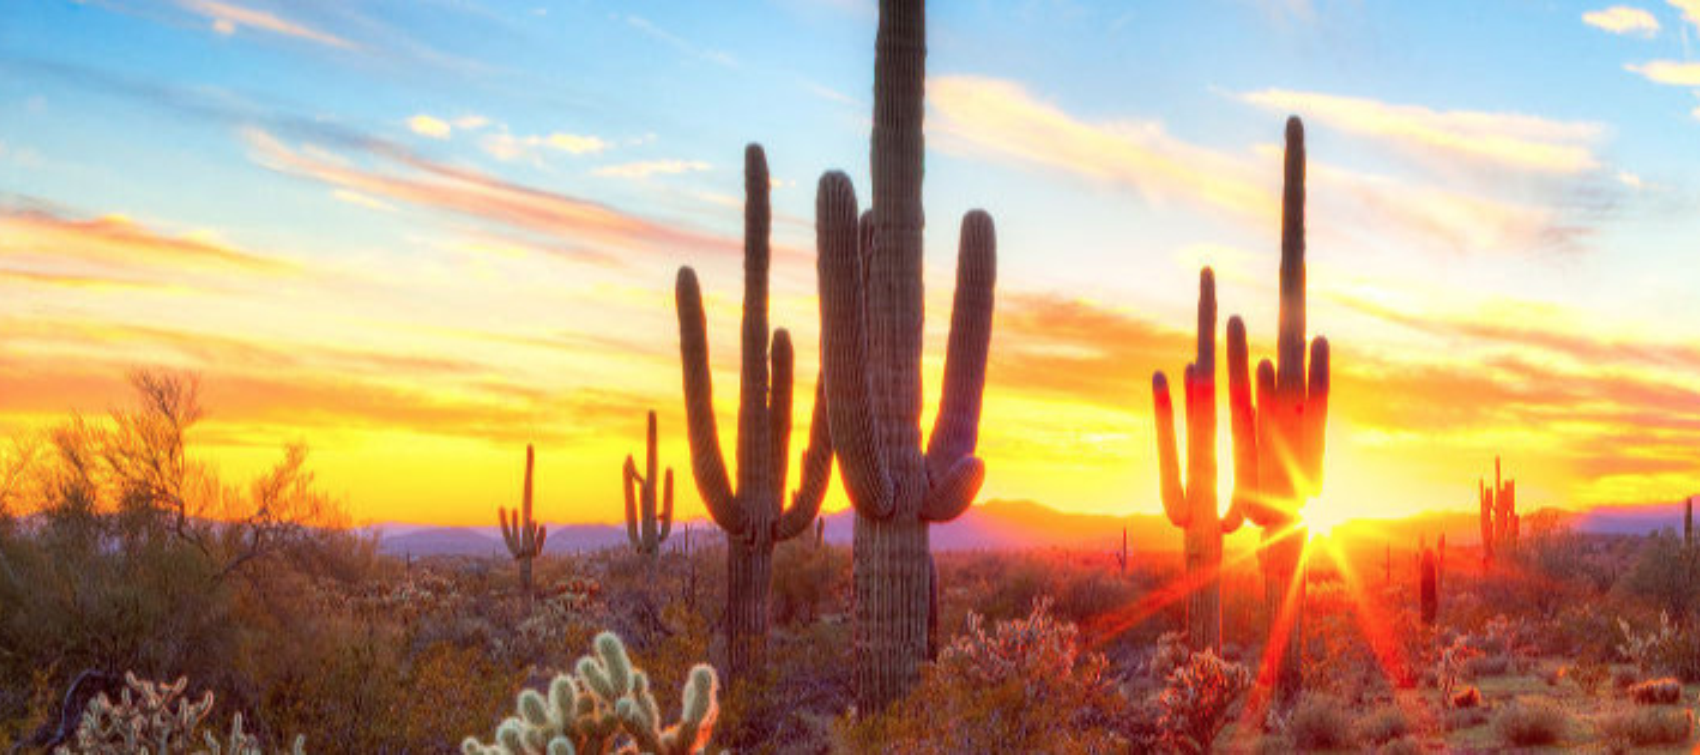 image of an arizona sunrise with saguaro cactus in the foreground